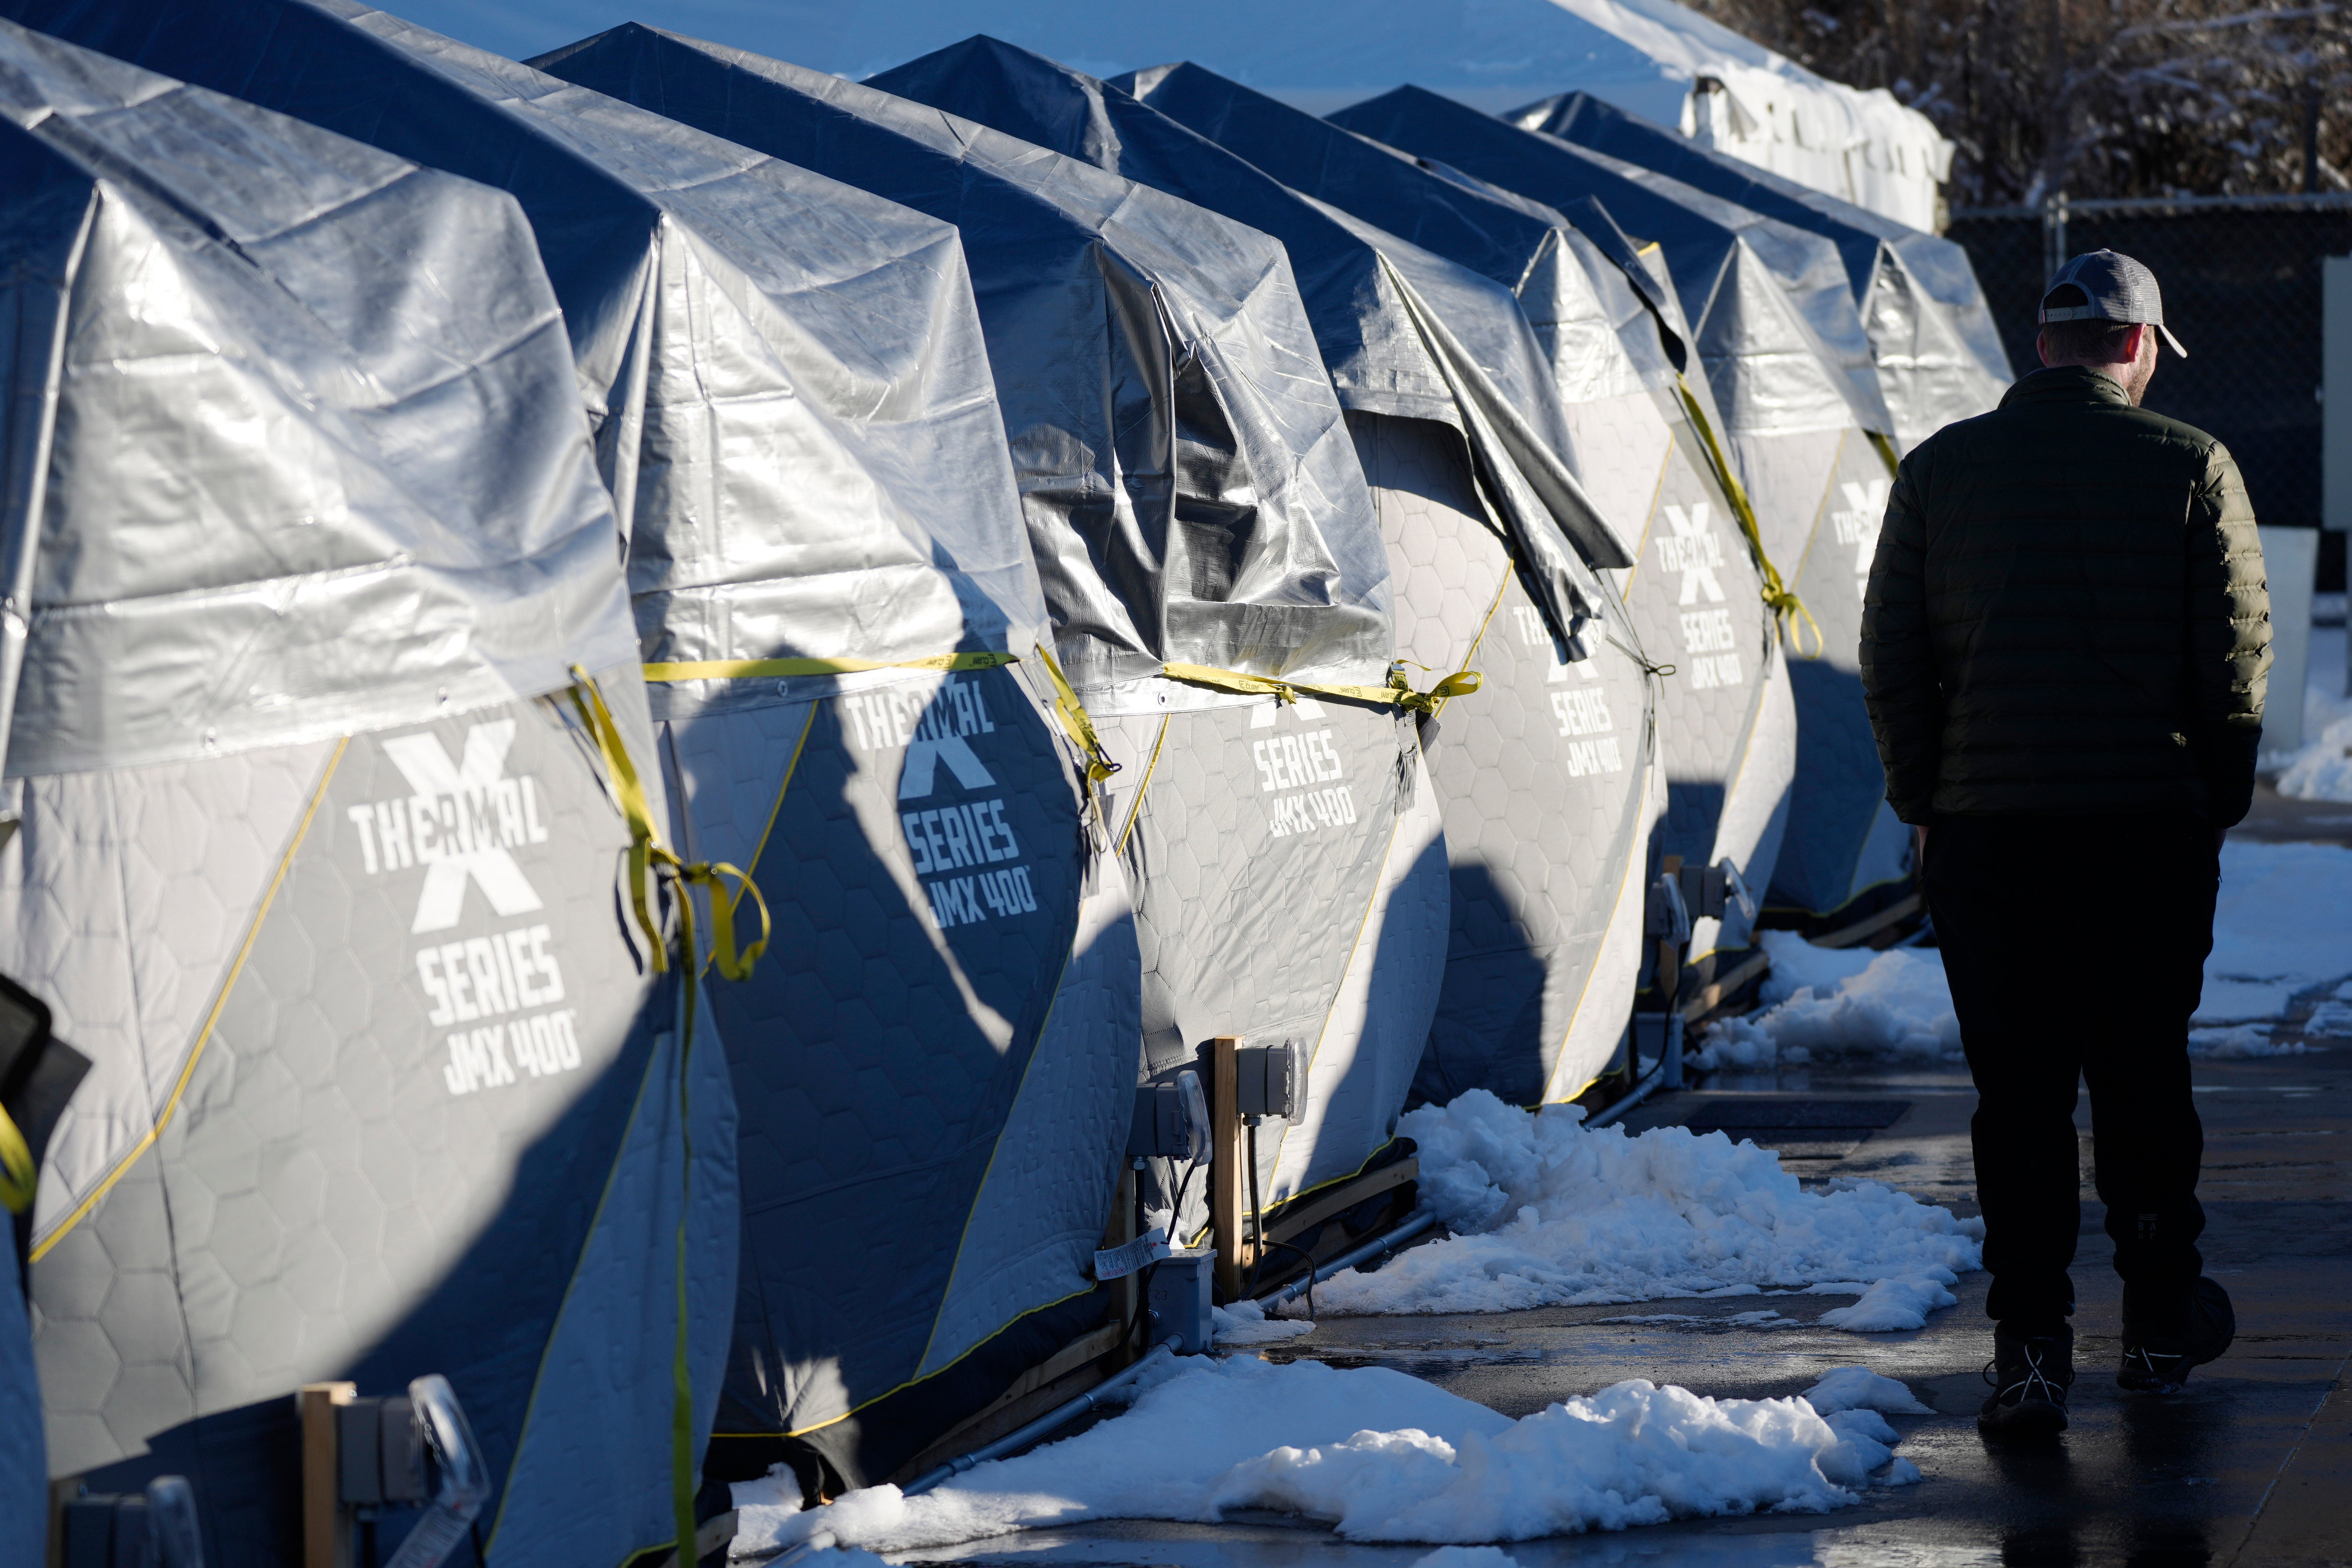 Ice fishing tents converted to housing for the homeless in